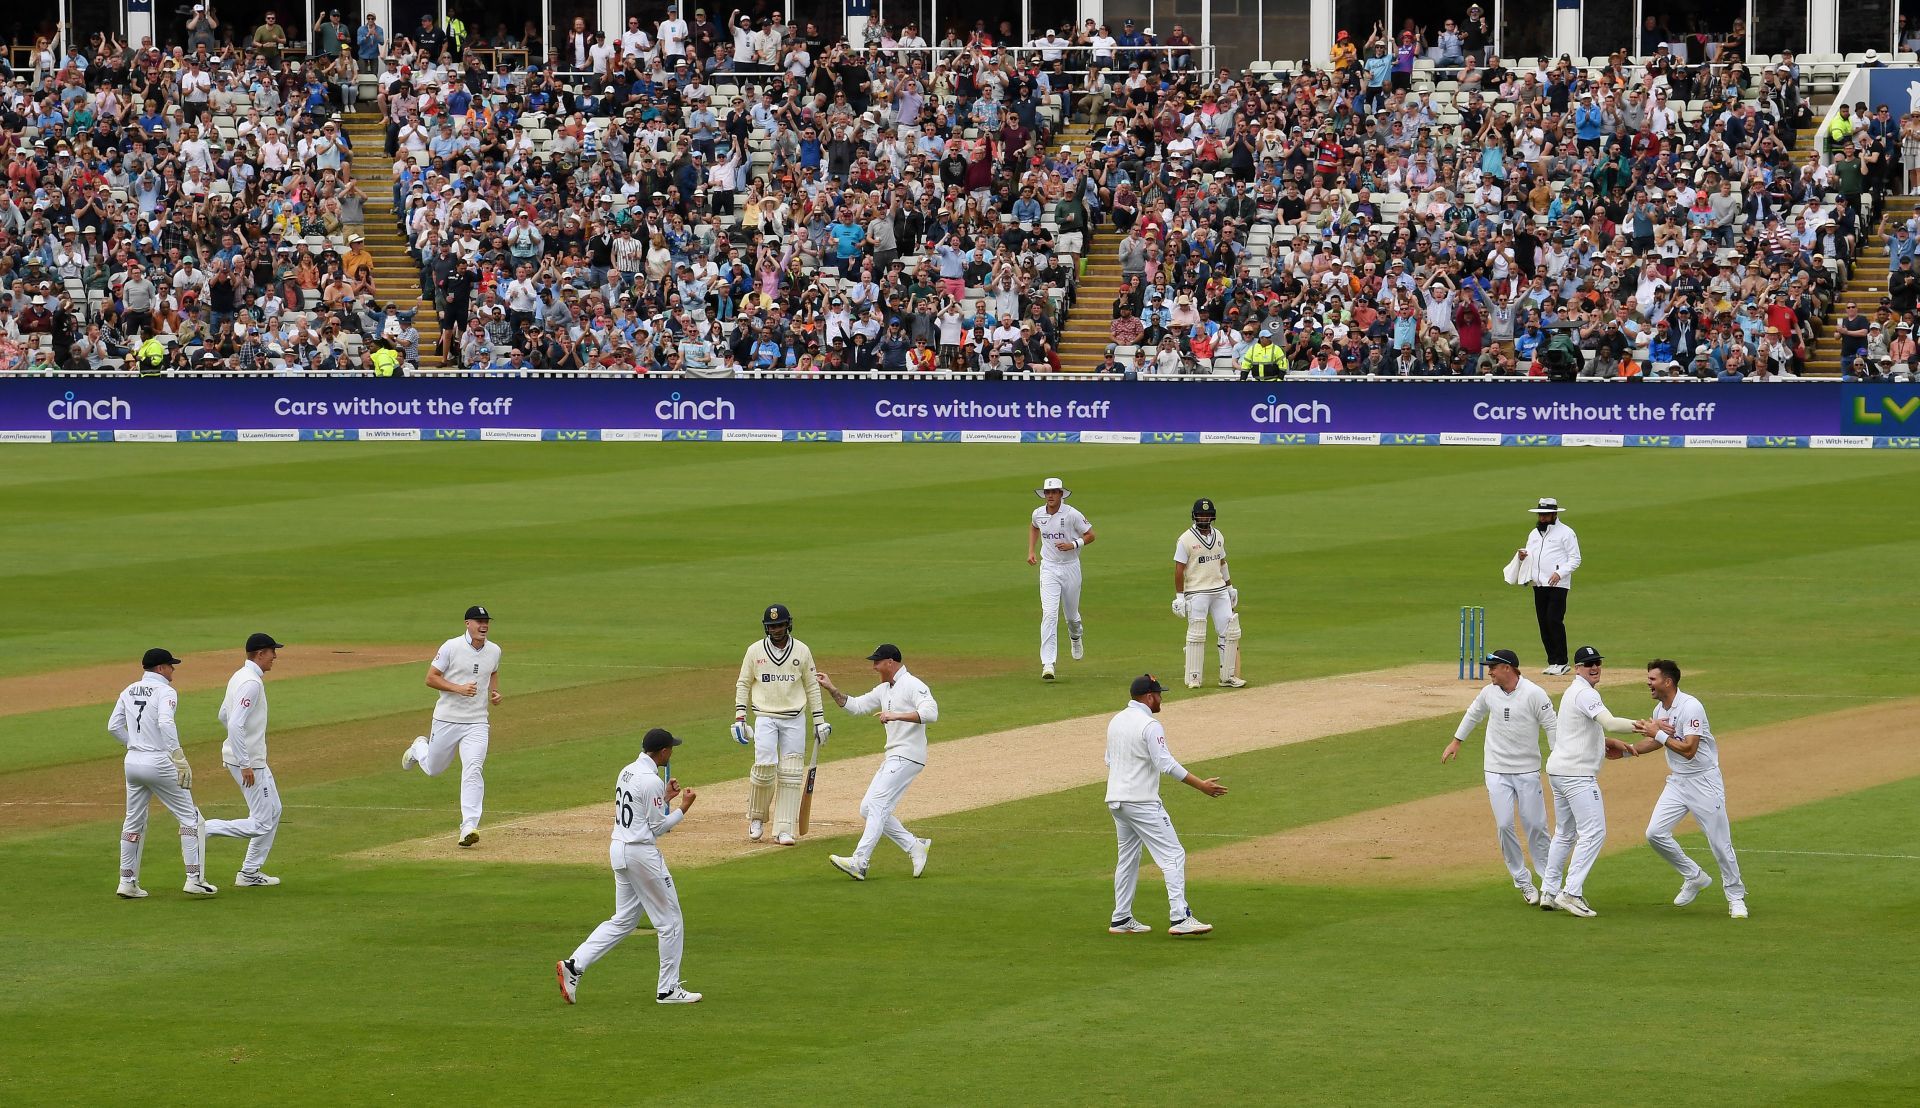 England need a strong display on Day 4 to stake a claim in the contest